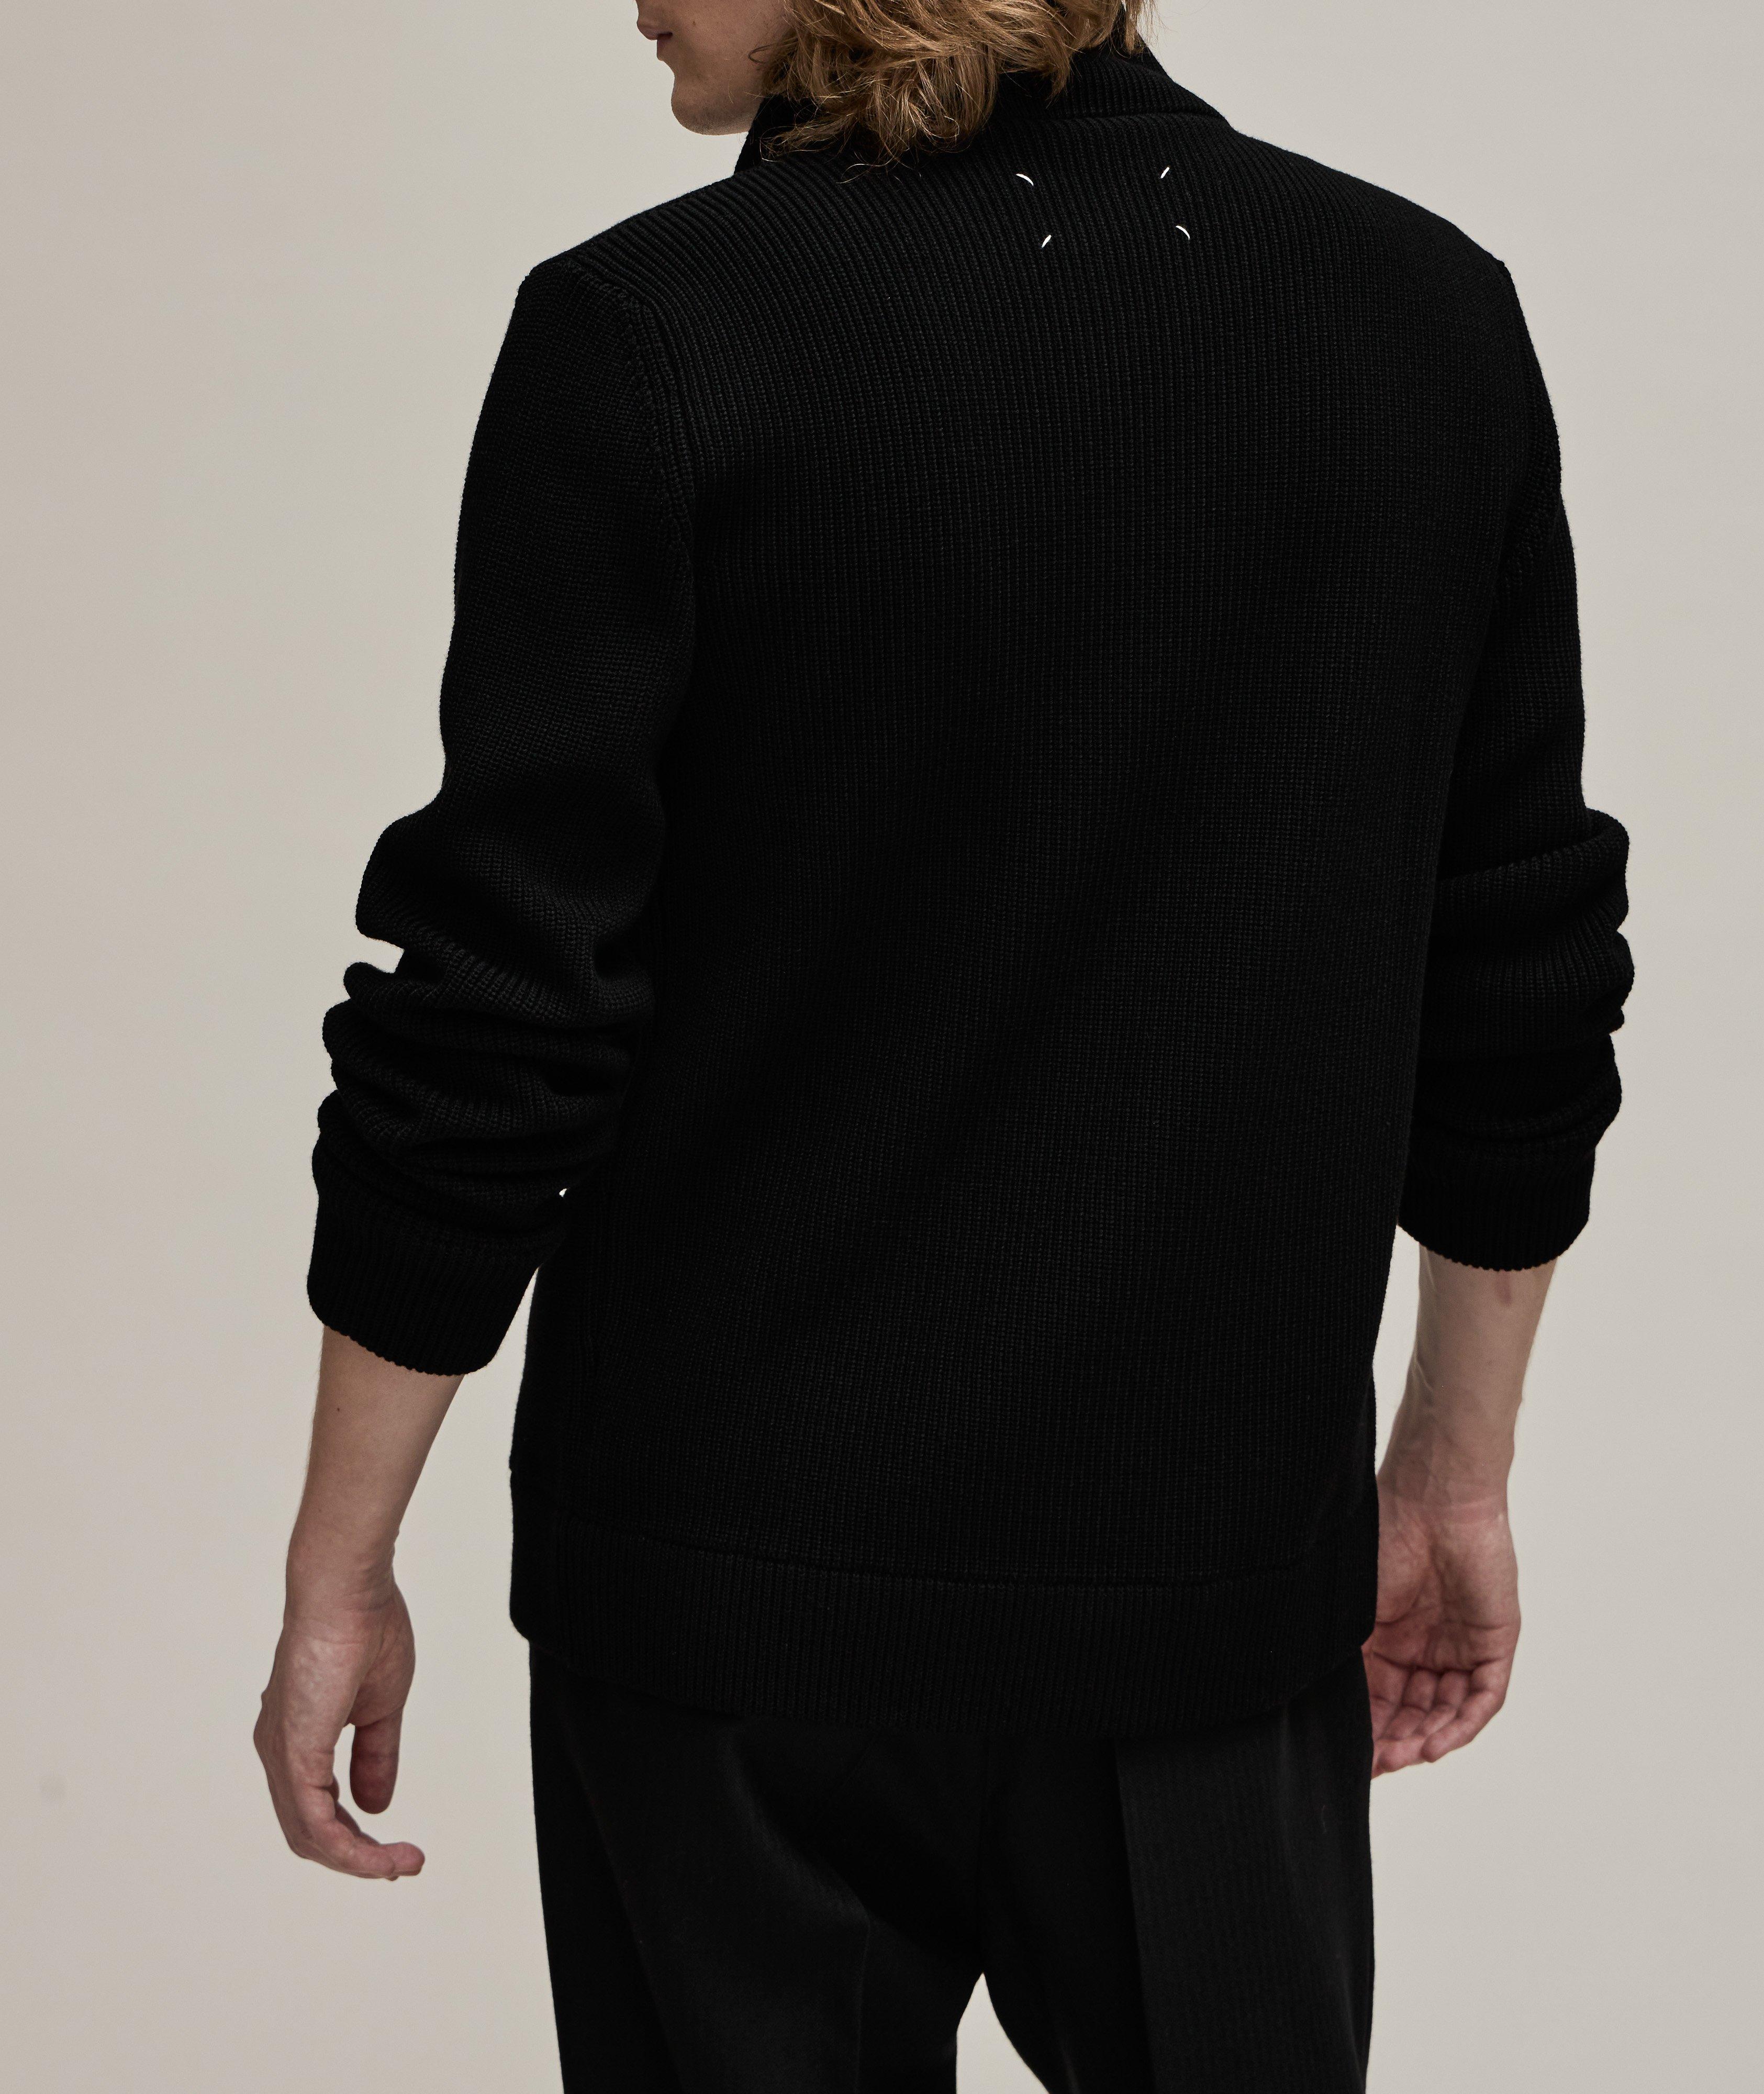 Black Cable Knit Sweater by Maison Margiela on Sale